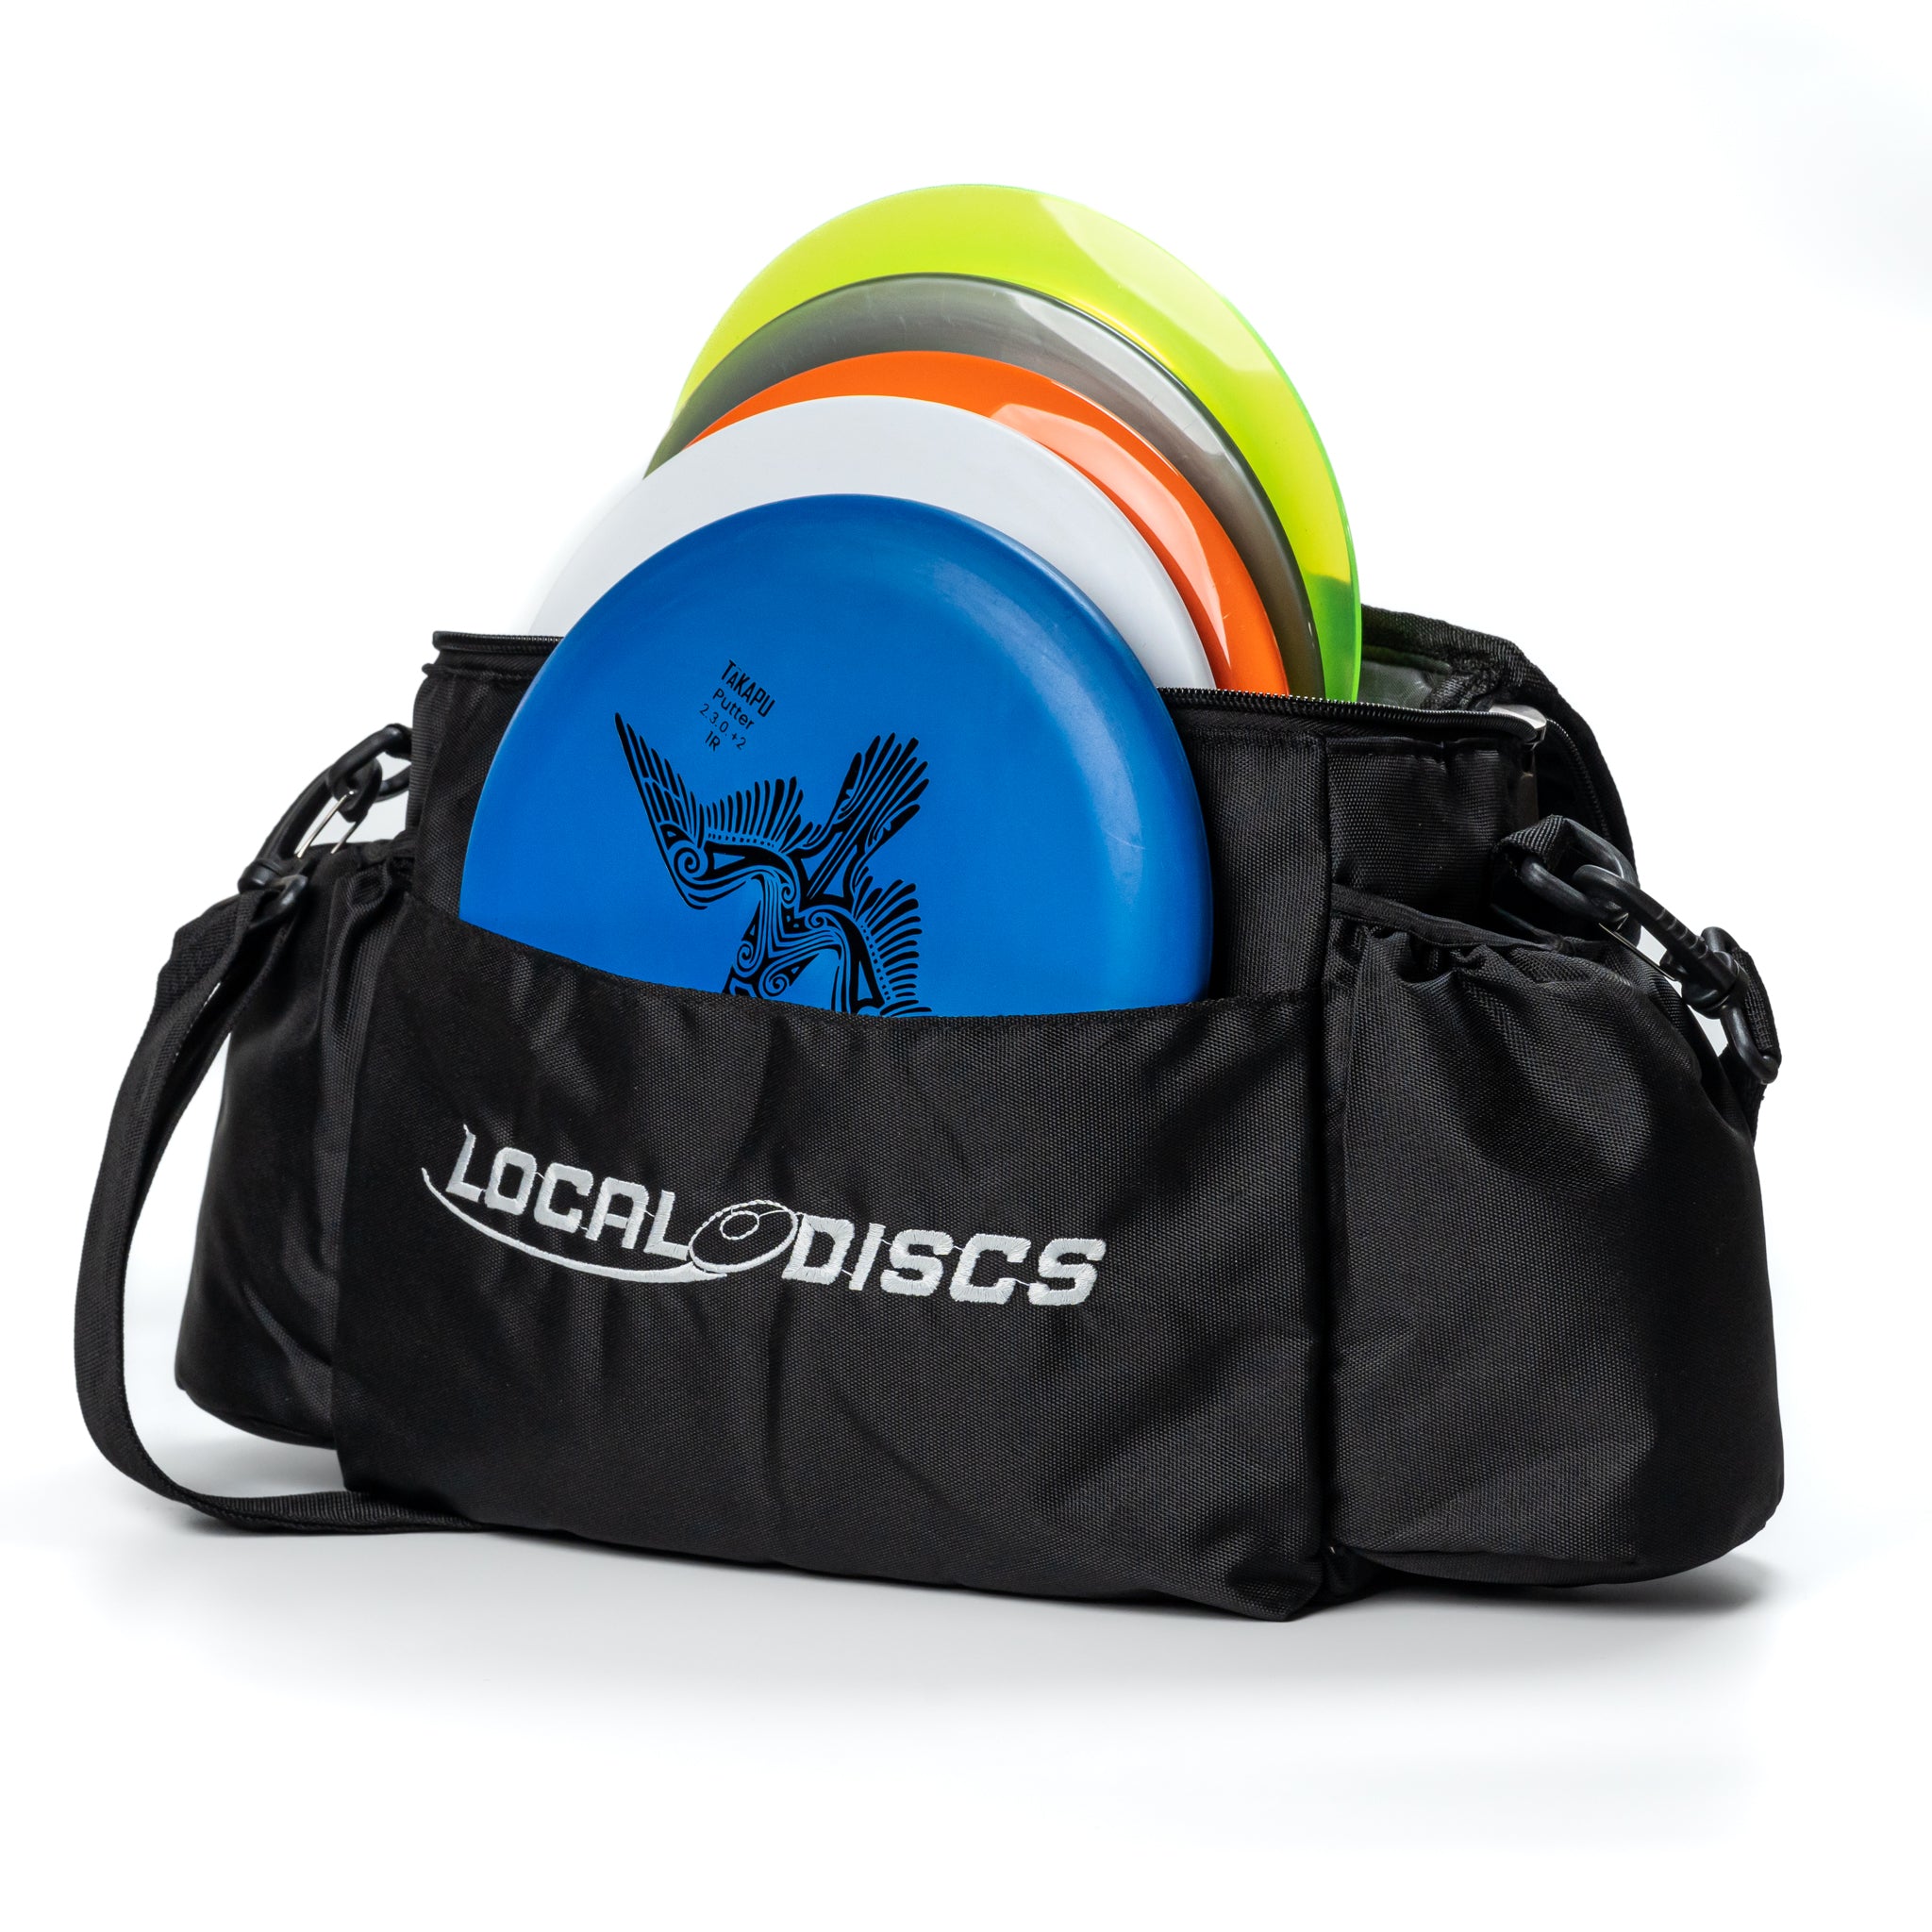 Local Discs Pro Starter Disc Golf Set with black bag and Takapu putter